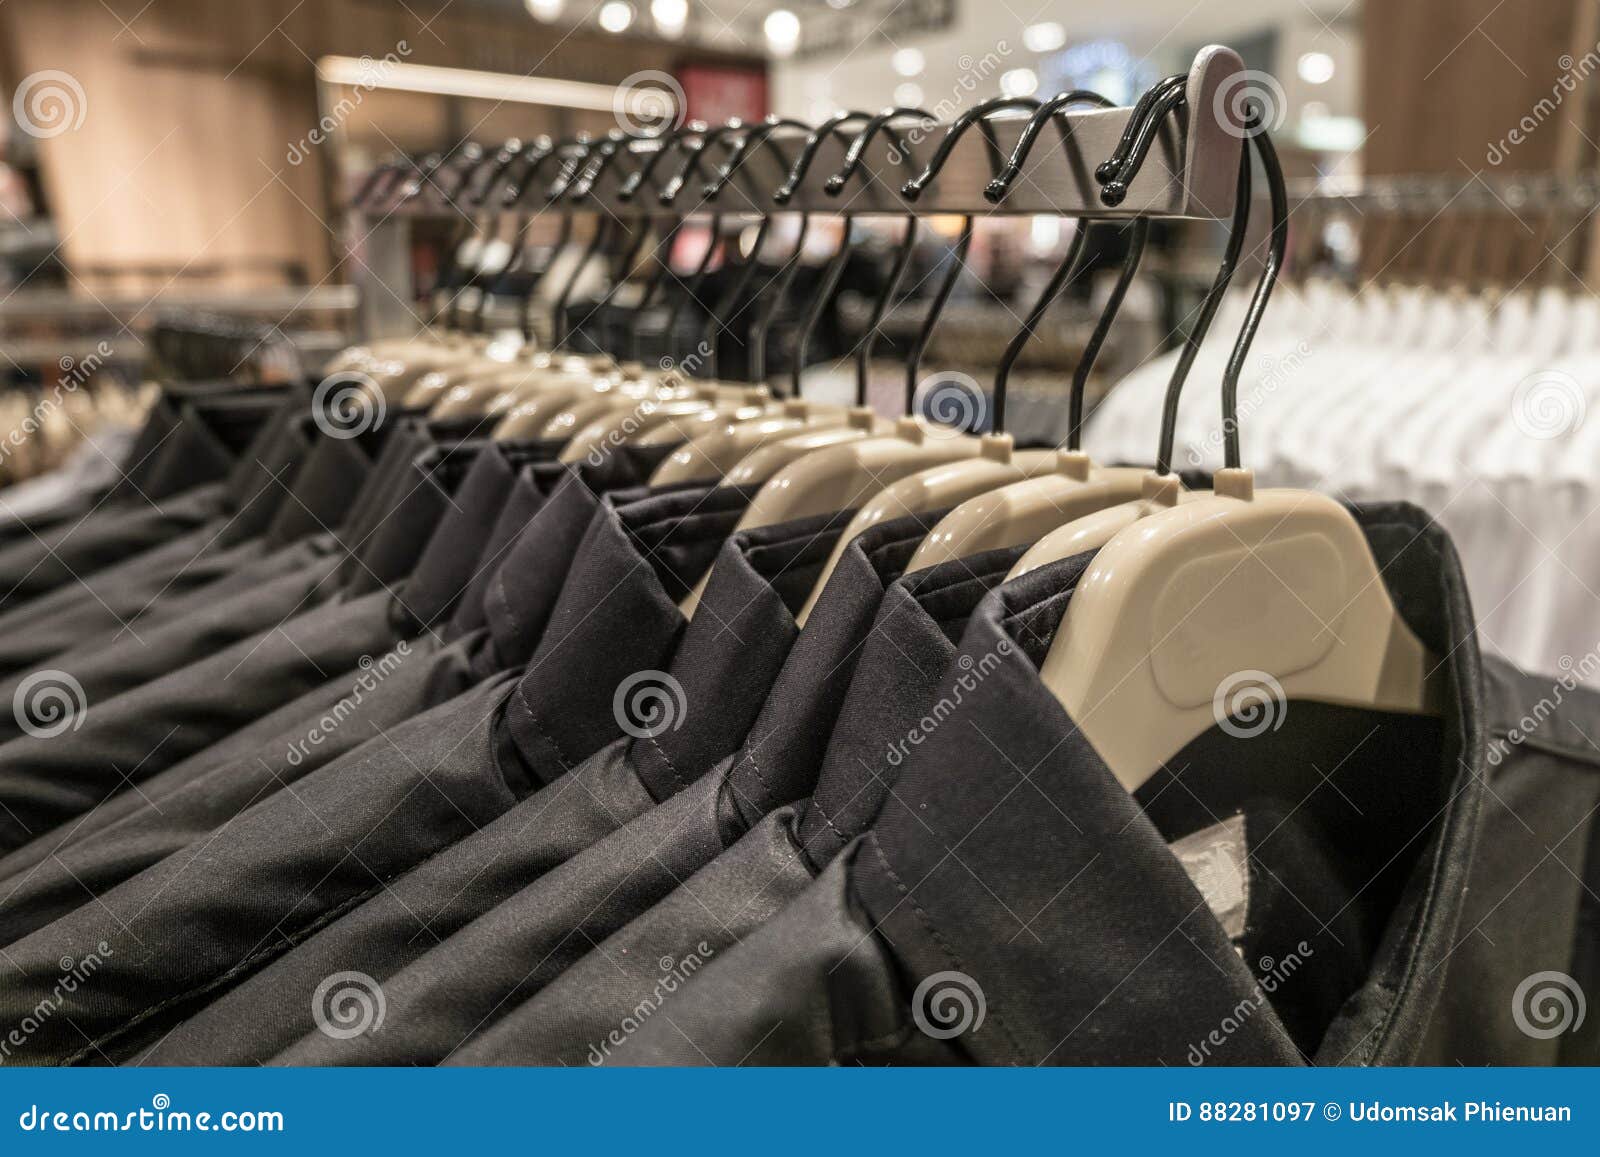 Black and Blue Shirt Hang on the Rack, Men`s Shirts on Hangers in ...